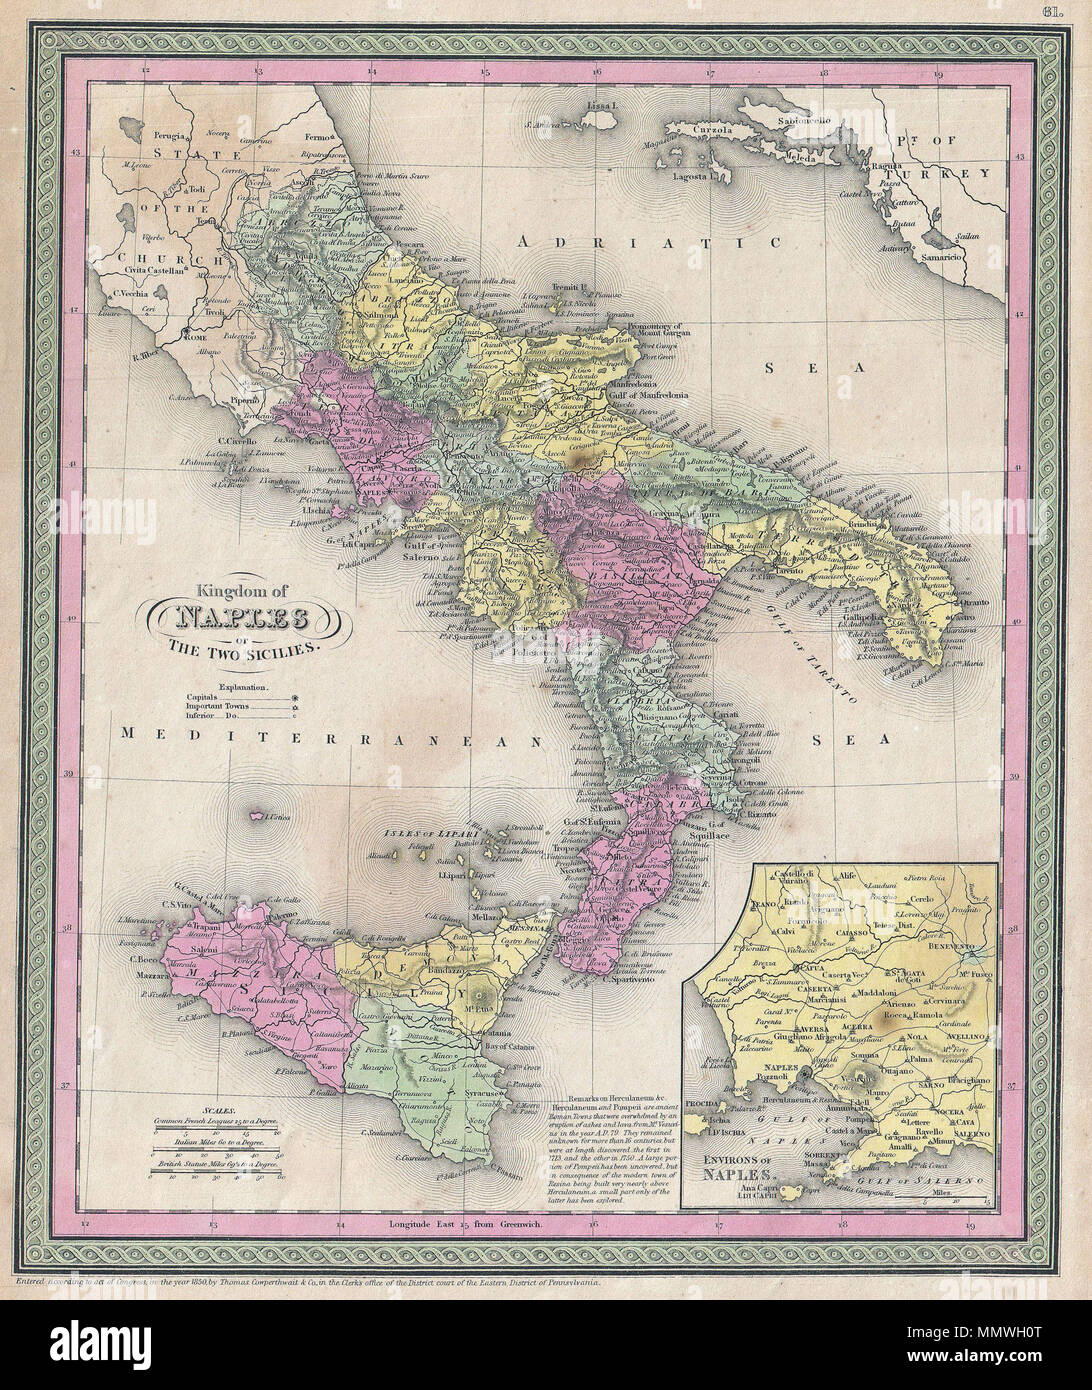 .  English: An extremely attractive example of S. A. Mitchell Sr.’s 1853 map of Southern Italy and Sicily. Covers from Rome south to include the boot of Italy and Sicily. Color coded according to region. An inset in the lower right hand quadrant details the vicinity of Naples. Surrounded by the green border common to Mitchell maps from the 1850s. Prepared by S. A. Mitchell for issued as plate no. 61 in the 1853 edition of his New Universal Atlas .  Kingdom of Naples or The Two Sicilies.. 1850 (undated). 1853 Mitchell Map of Southern Italy ( Naples, Sicily ) - Geographicus - ItalySouth-mitchell Stock Photo